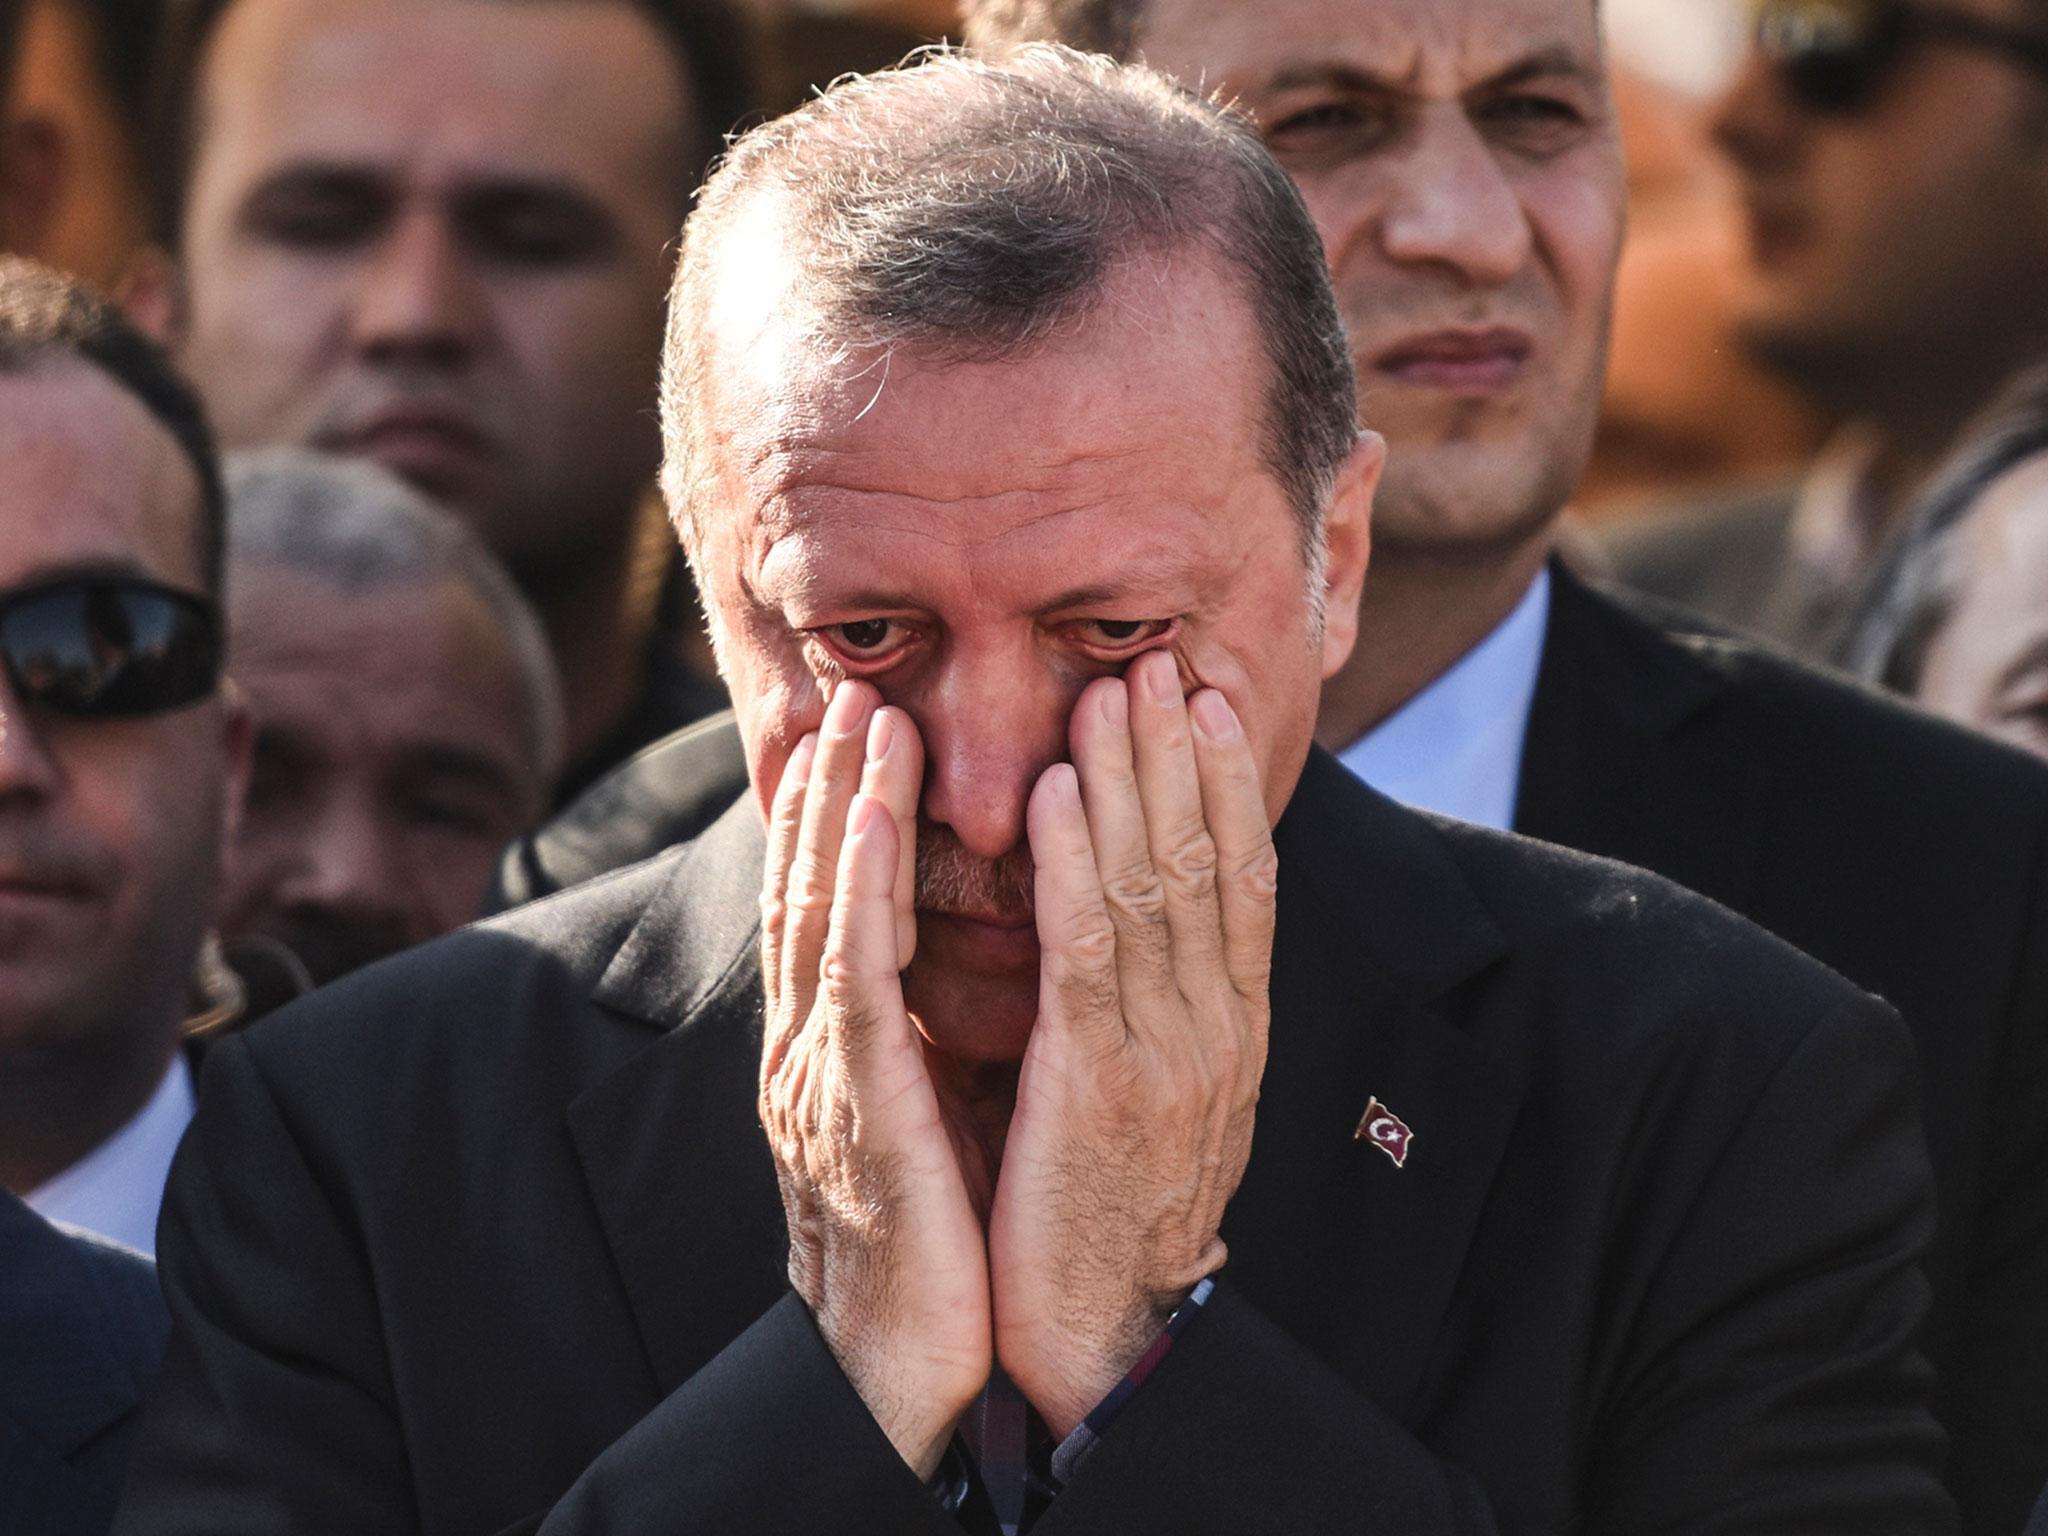 Turkey's President Recep Tayyip Erdogan reacts after attending the funeral of a victim of the coup attempt in Istanbul on 17 July, 2016